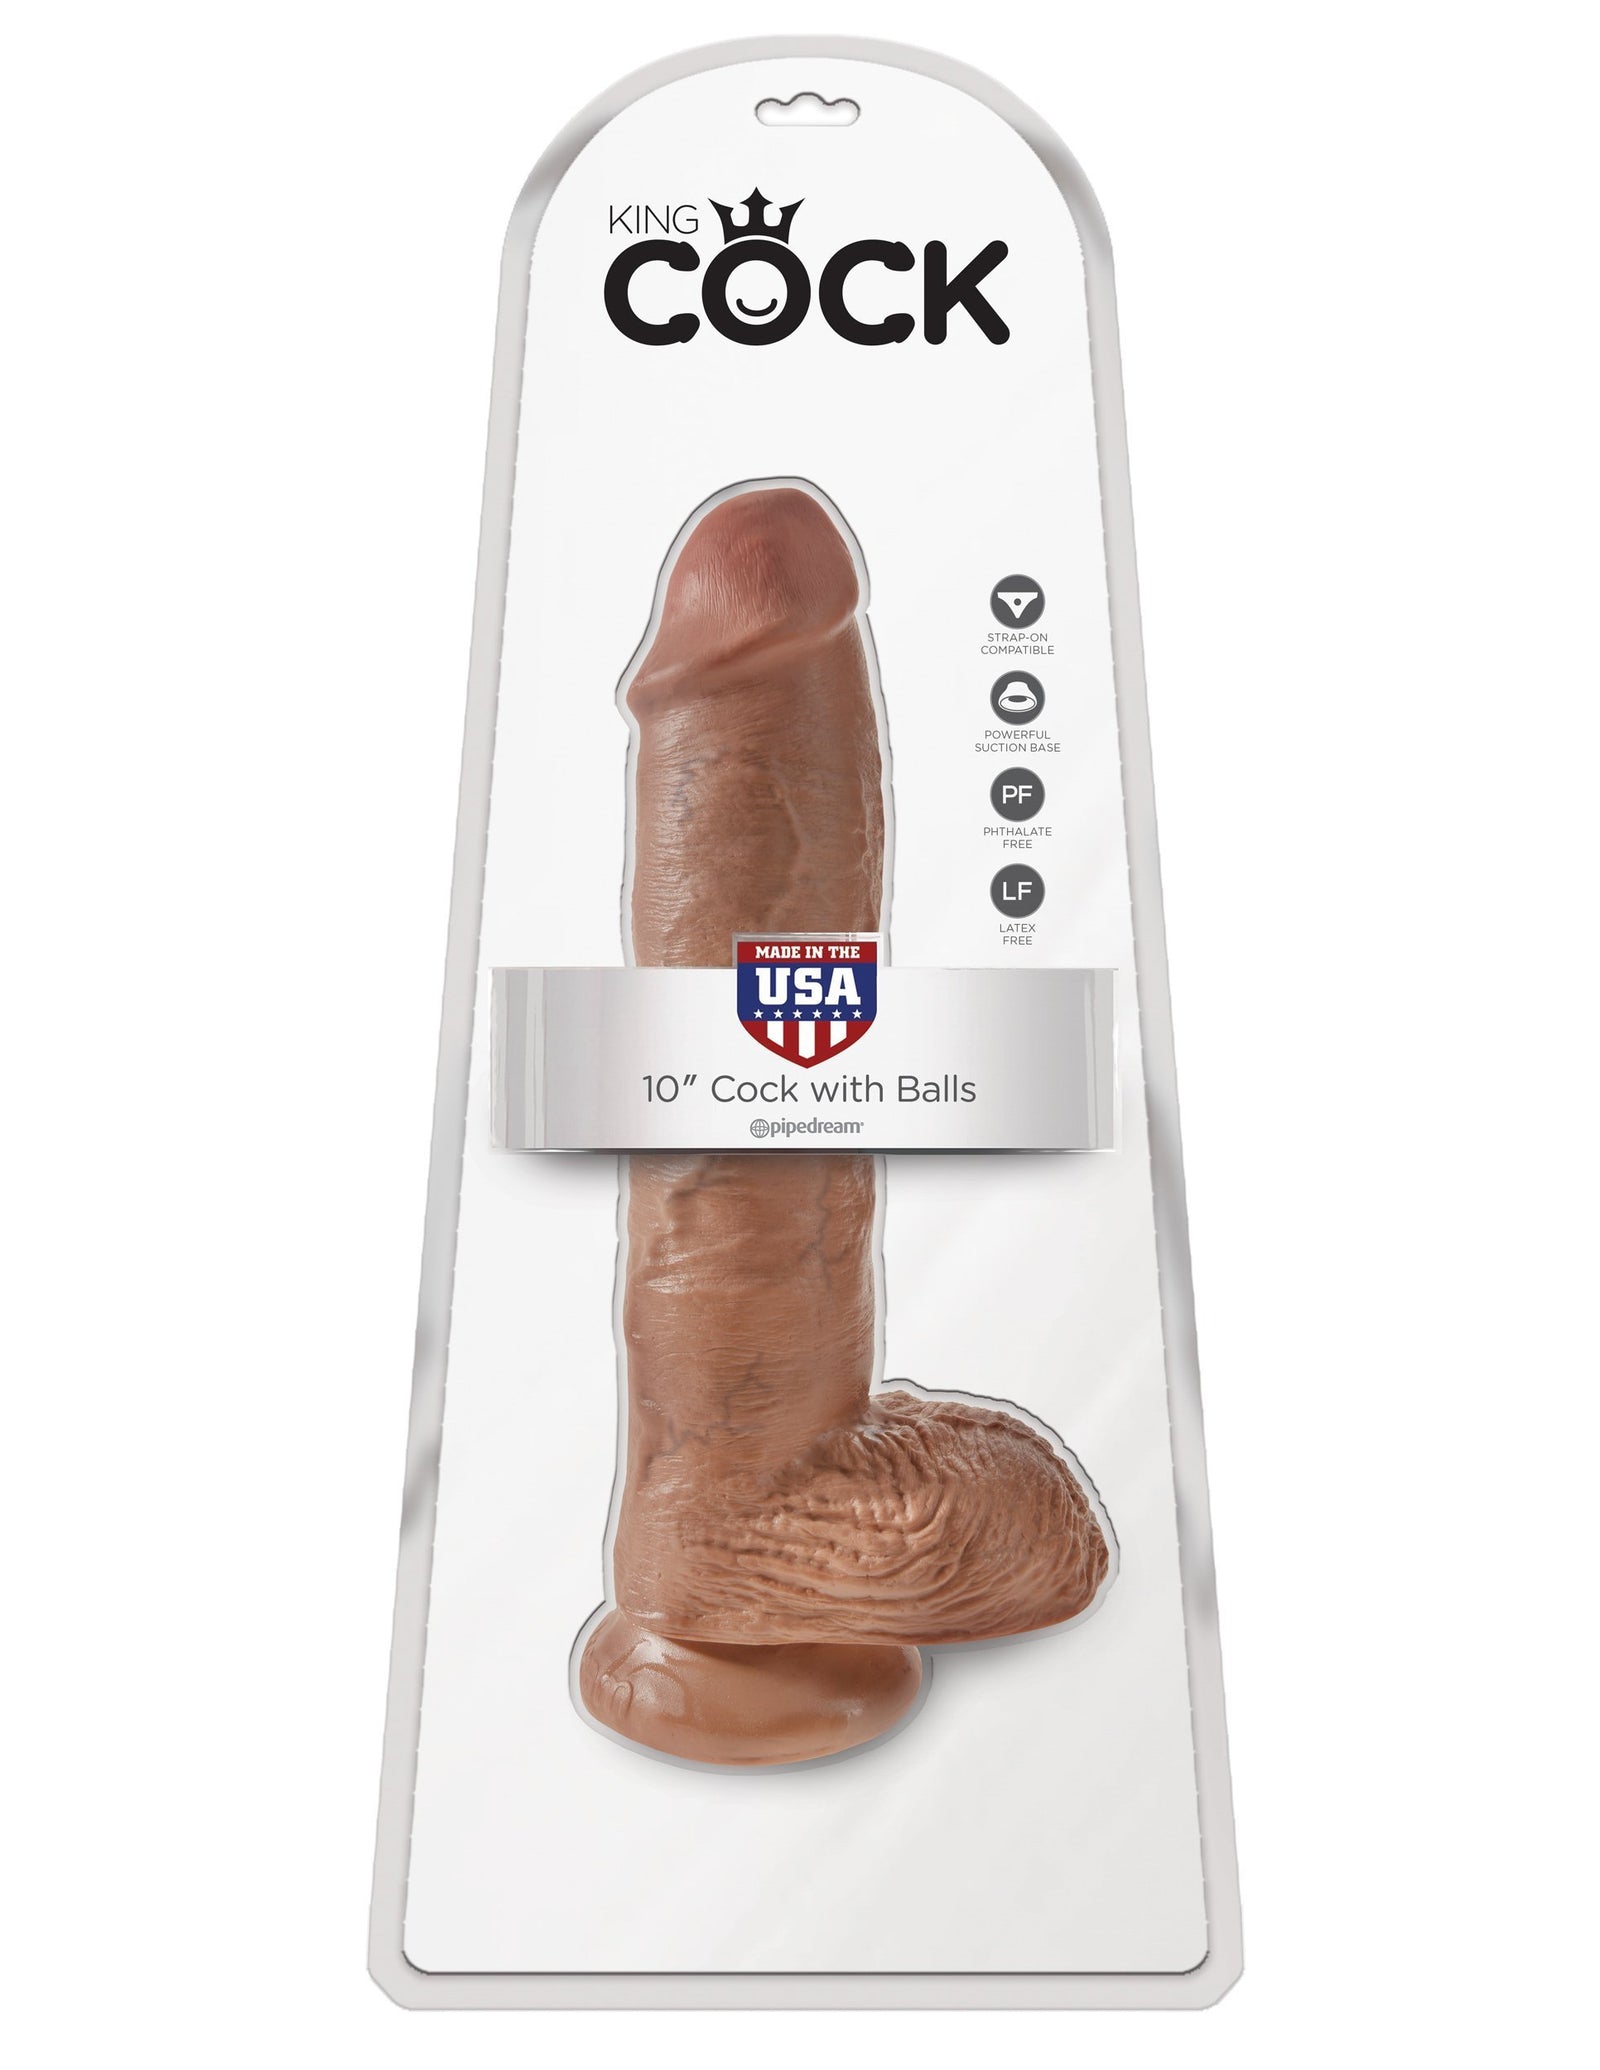 Pipedream - King Cock 10" Cock with Balls (Brown) Realistic Dildo with suction cup (Non Vibration) Singapore